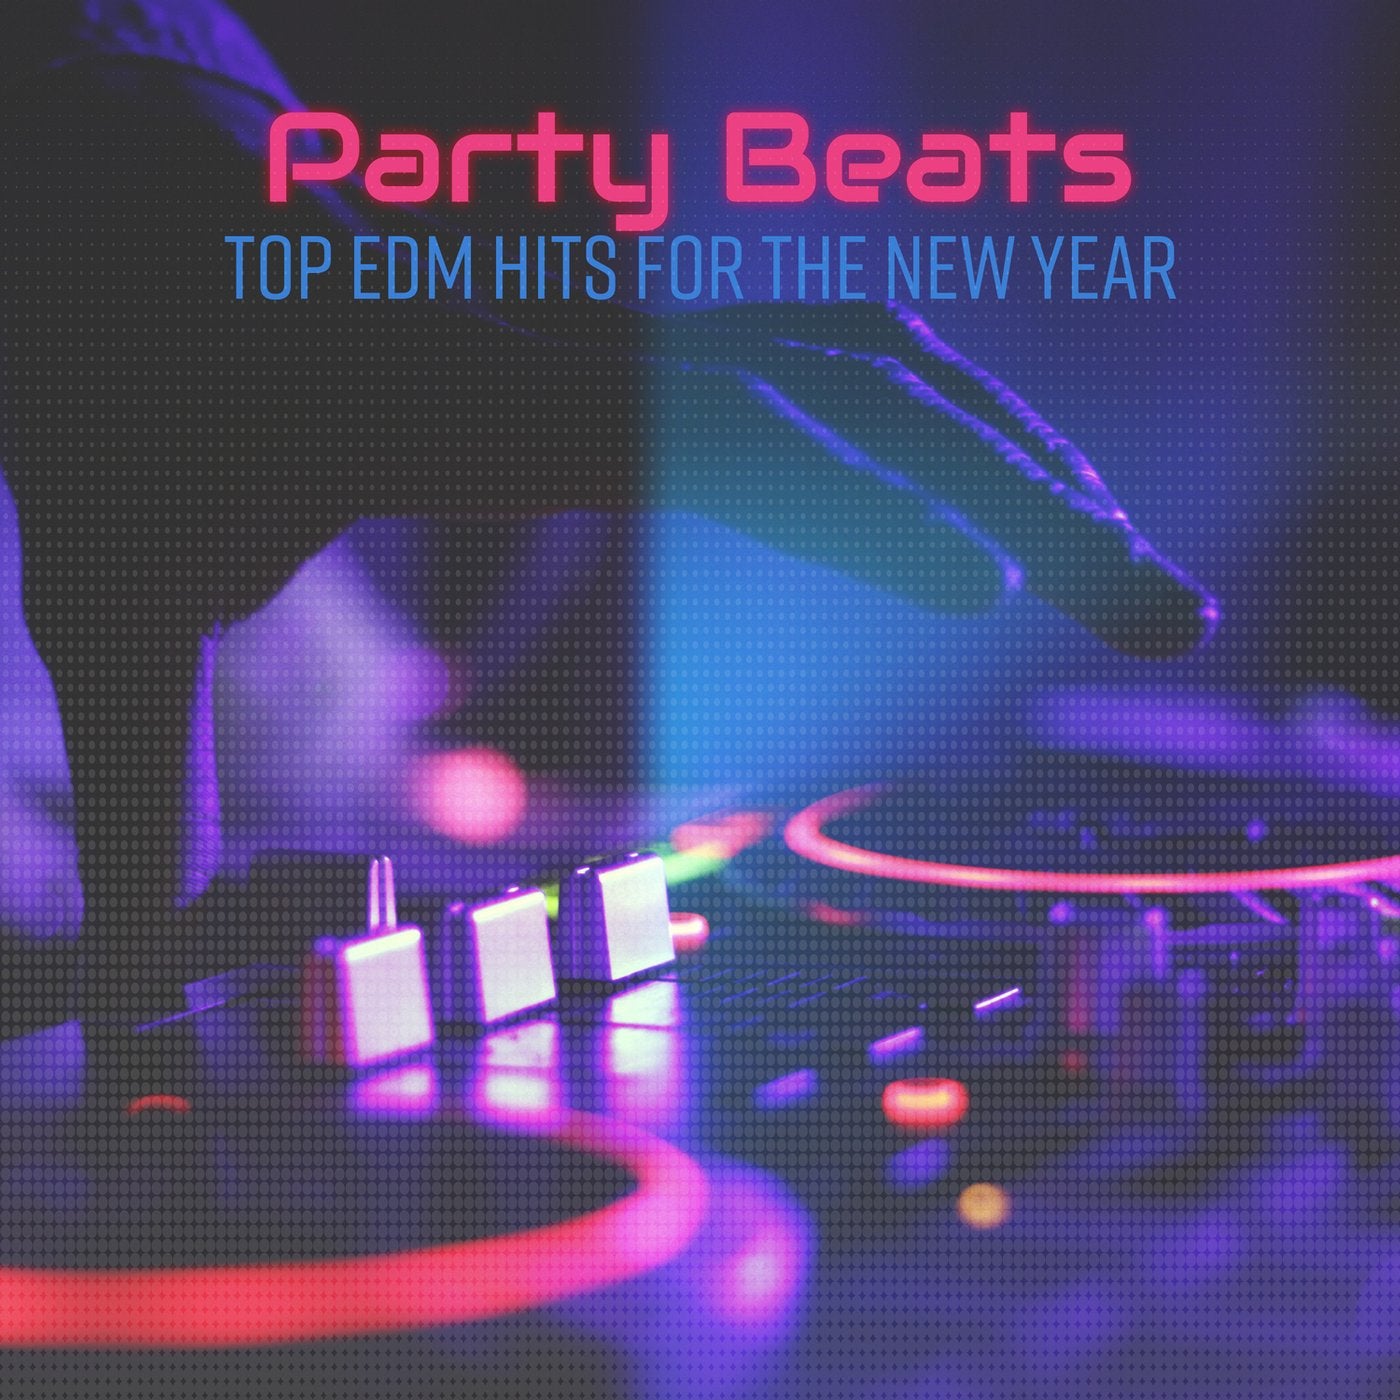 Party Beats: Top EDM Hits for the New Year